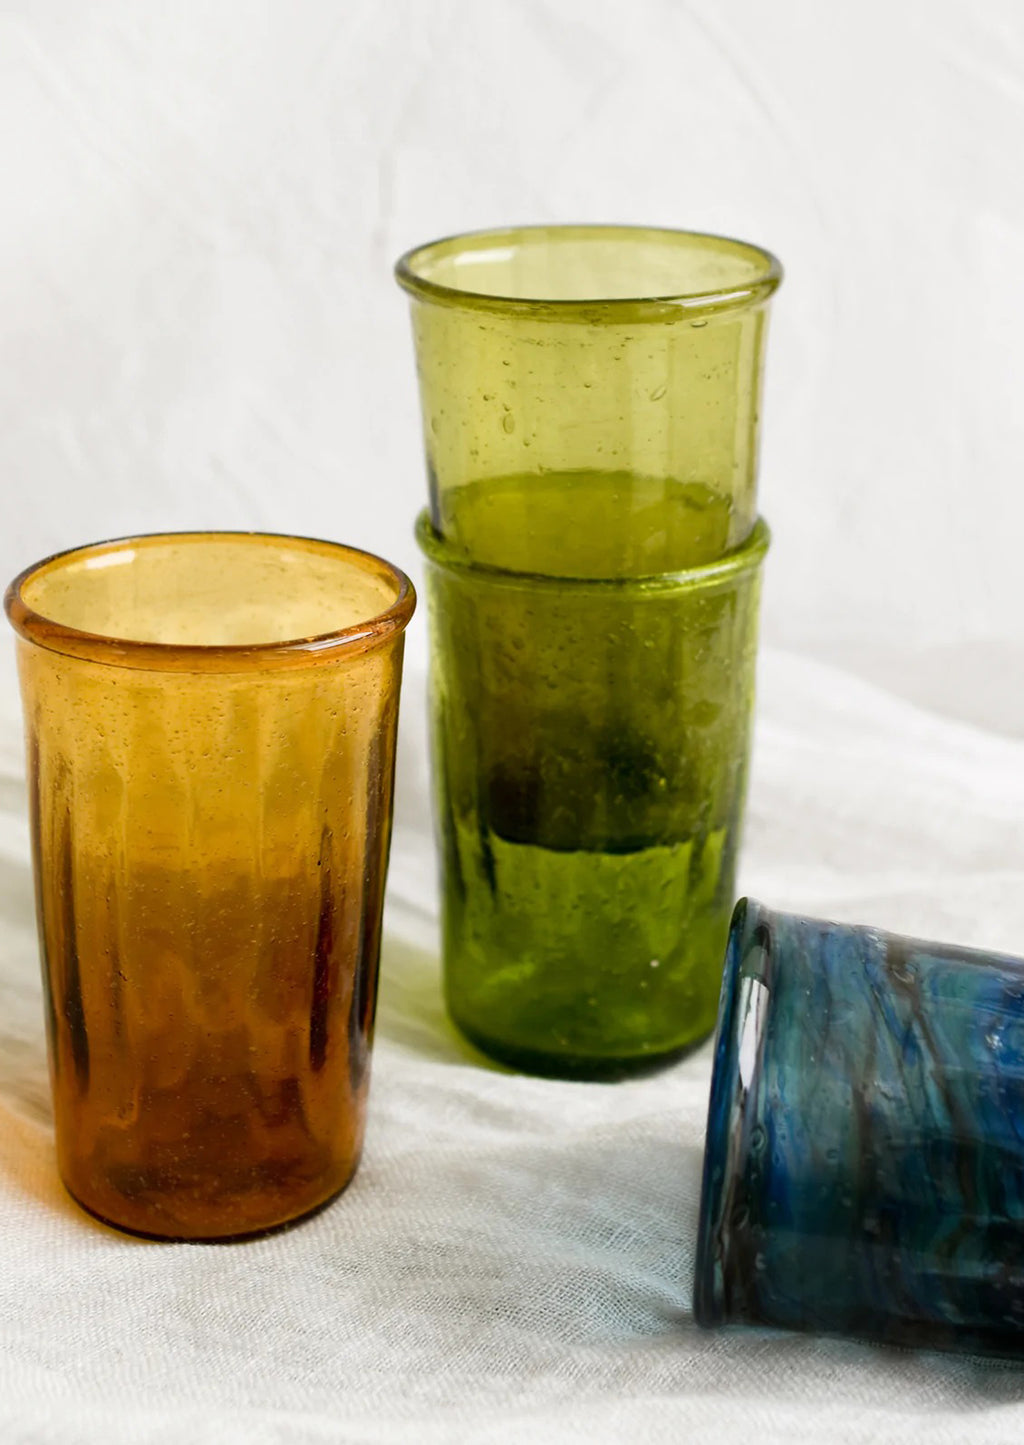 2: Colorful tumblers in translucent glass in assorted colors.